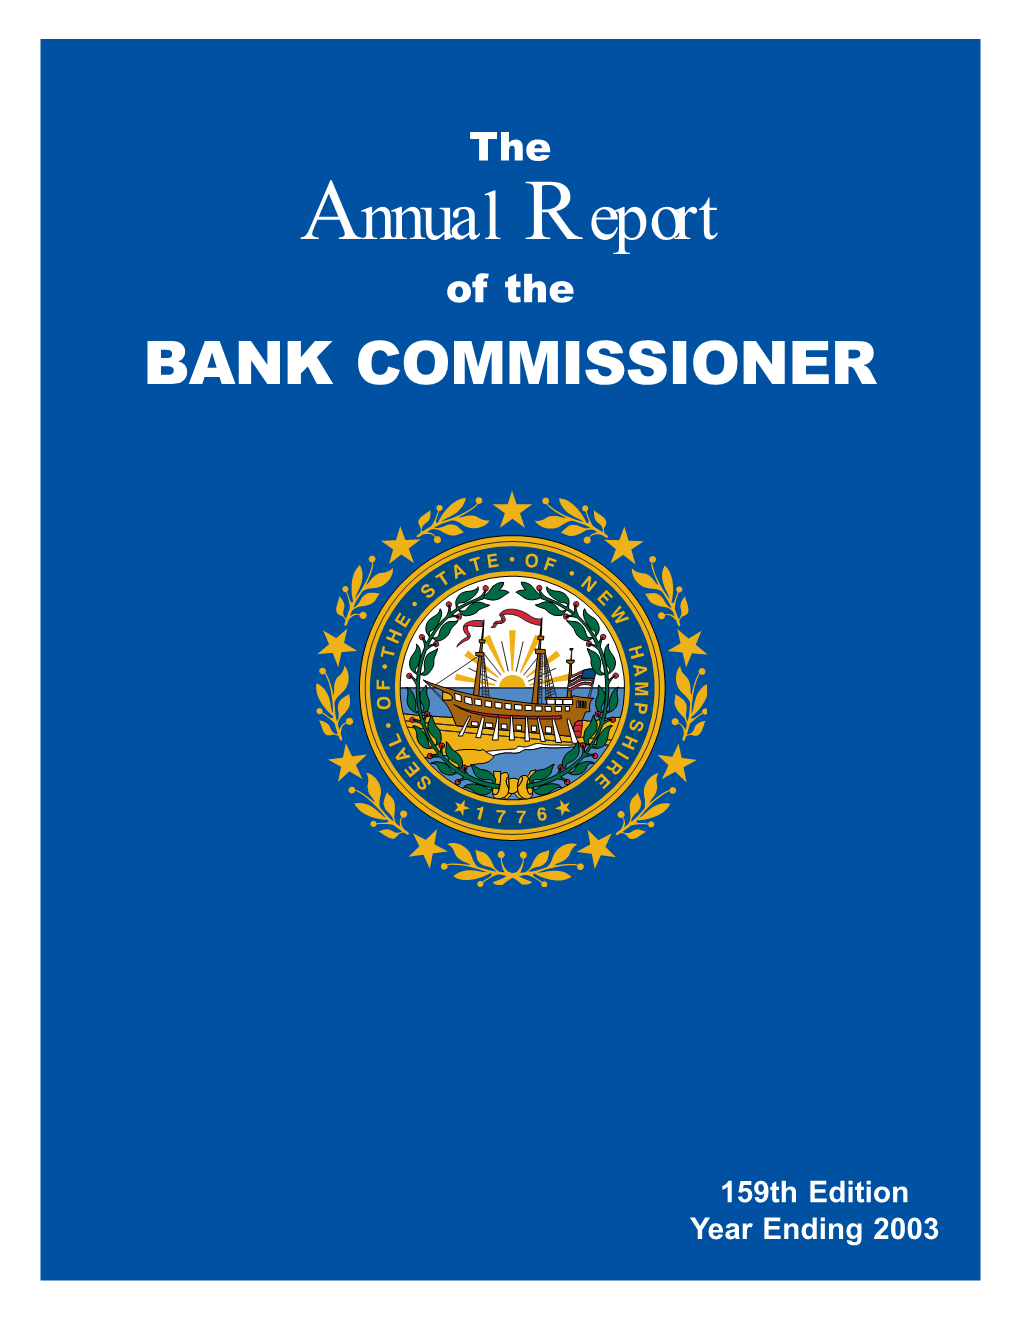 Banking Commission Annual Report 2003